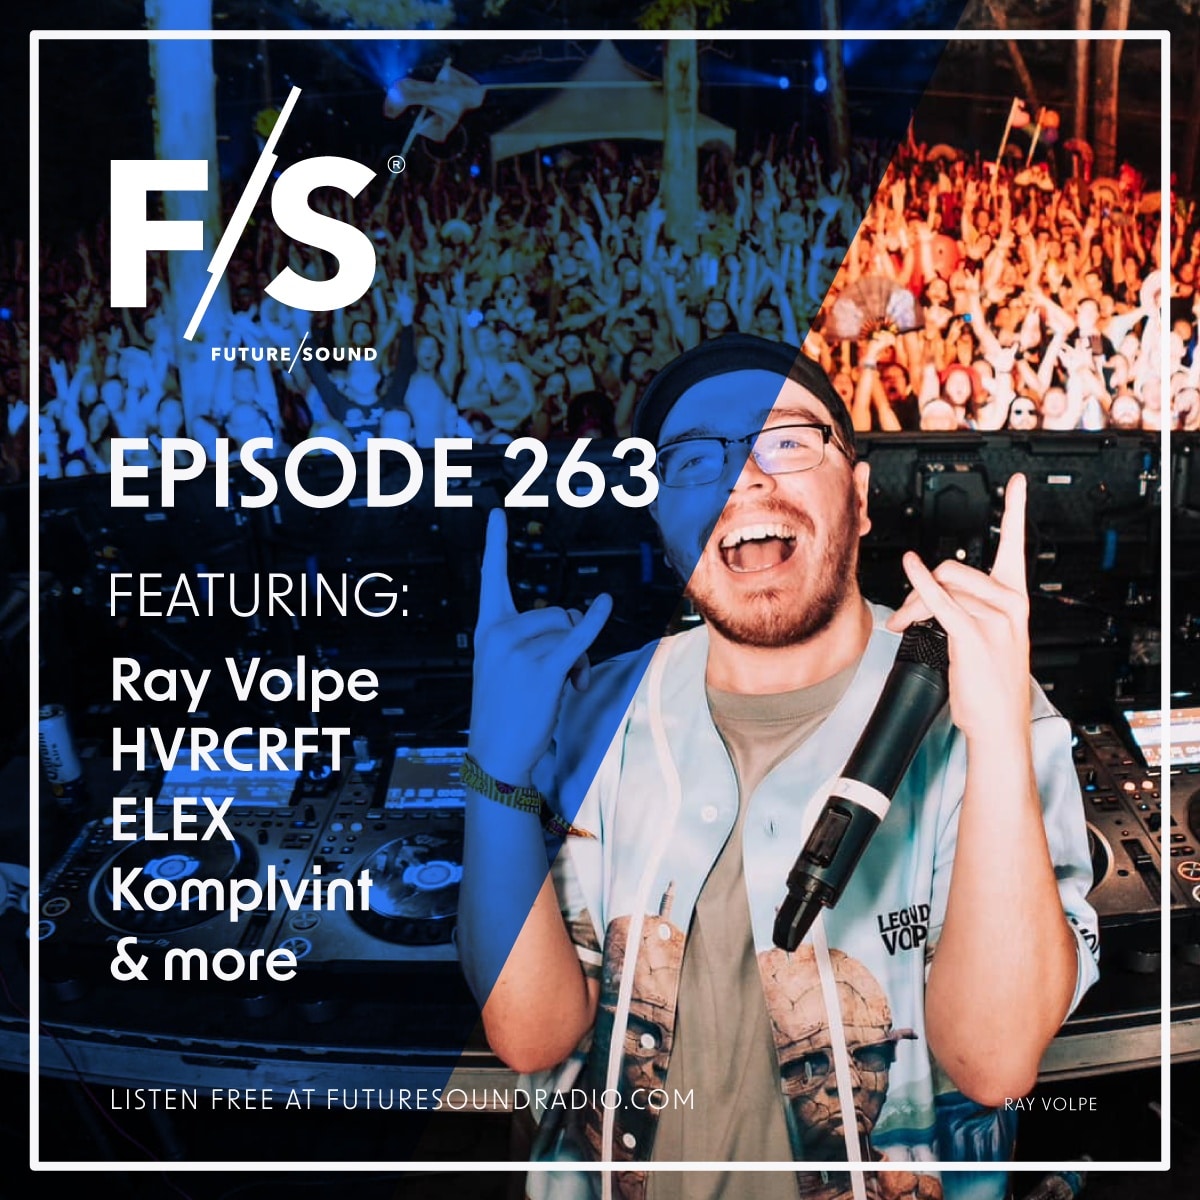 Future/Sound Episode 263 feat. Ray Volpe, HVRCRFT, ELEX, Komplvint, and more